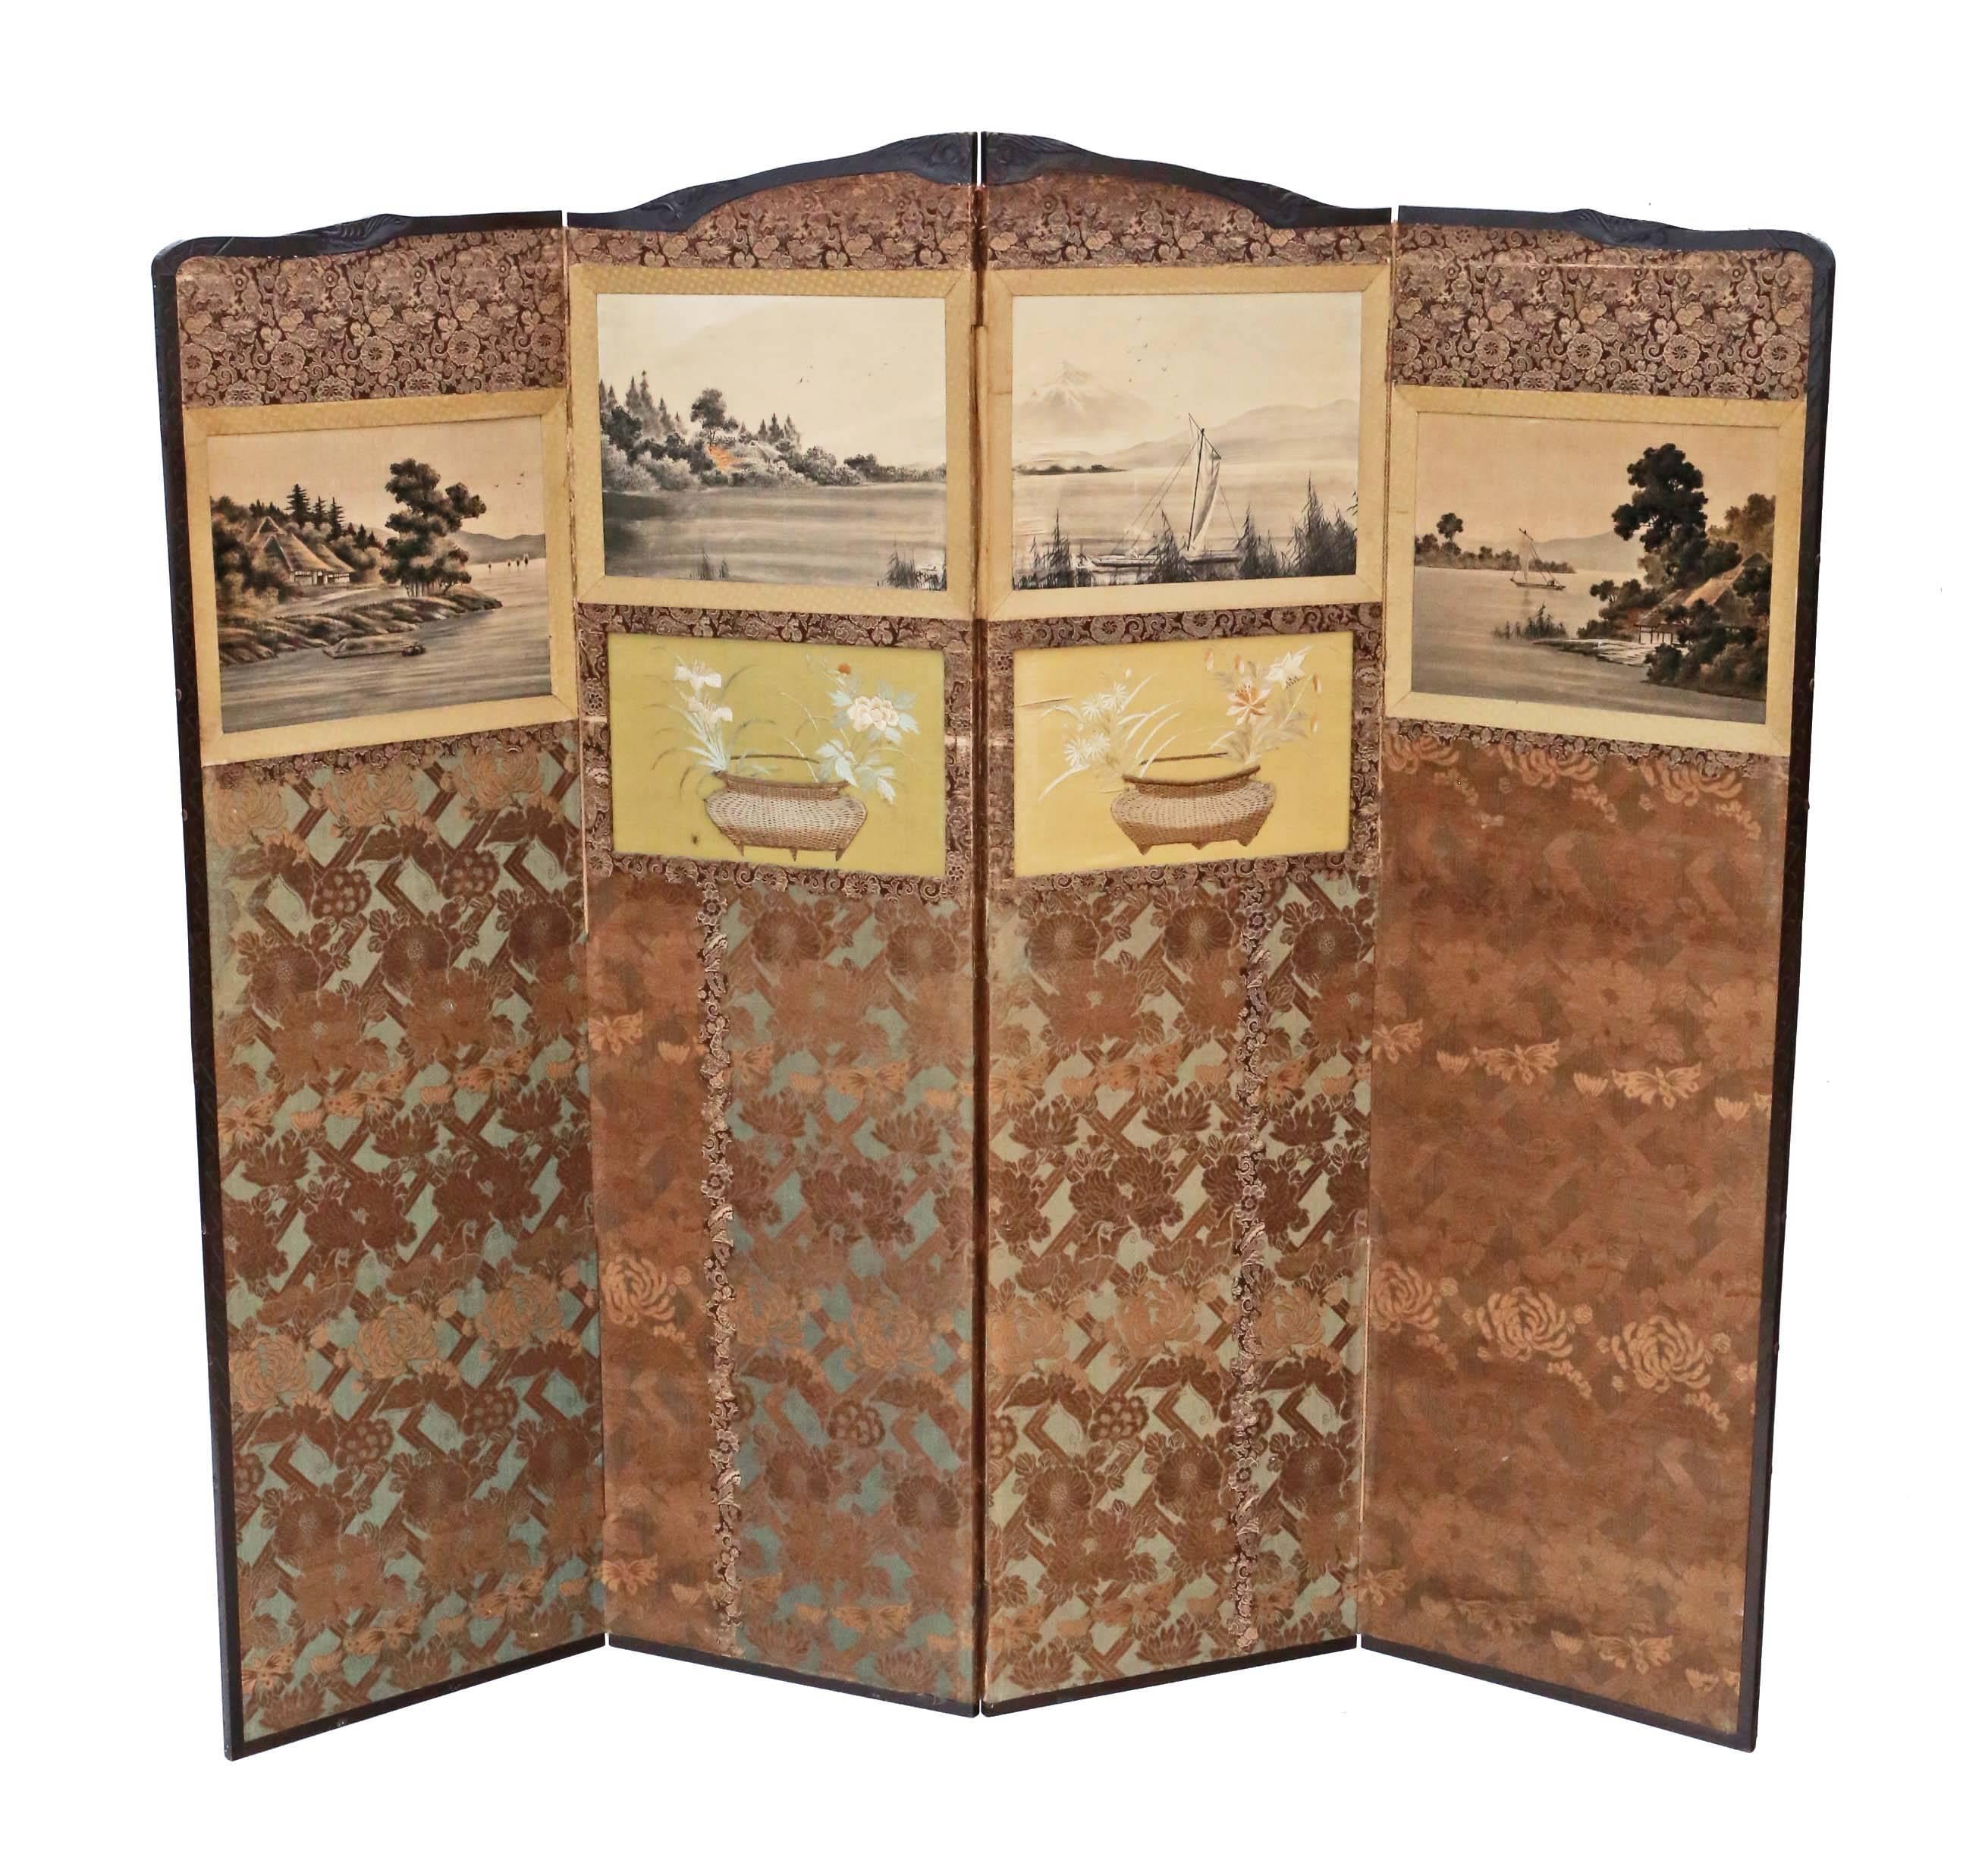 Antique large Victorian chinoiserie, circa 1900 mahogany dressing screen. Attractive silk / other woven and embroidered designs. A rare find.

Would look amazing in the right location, very old with a lovely age, colour and patina. No